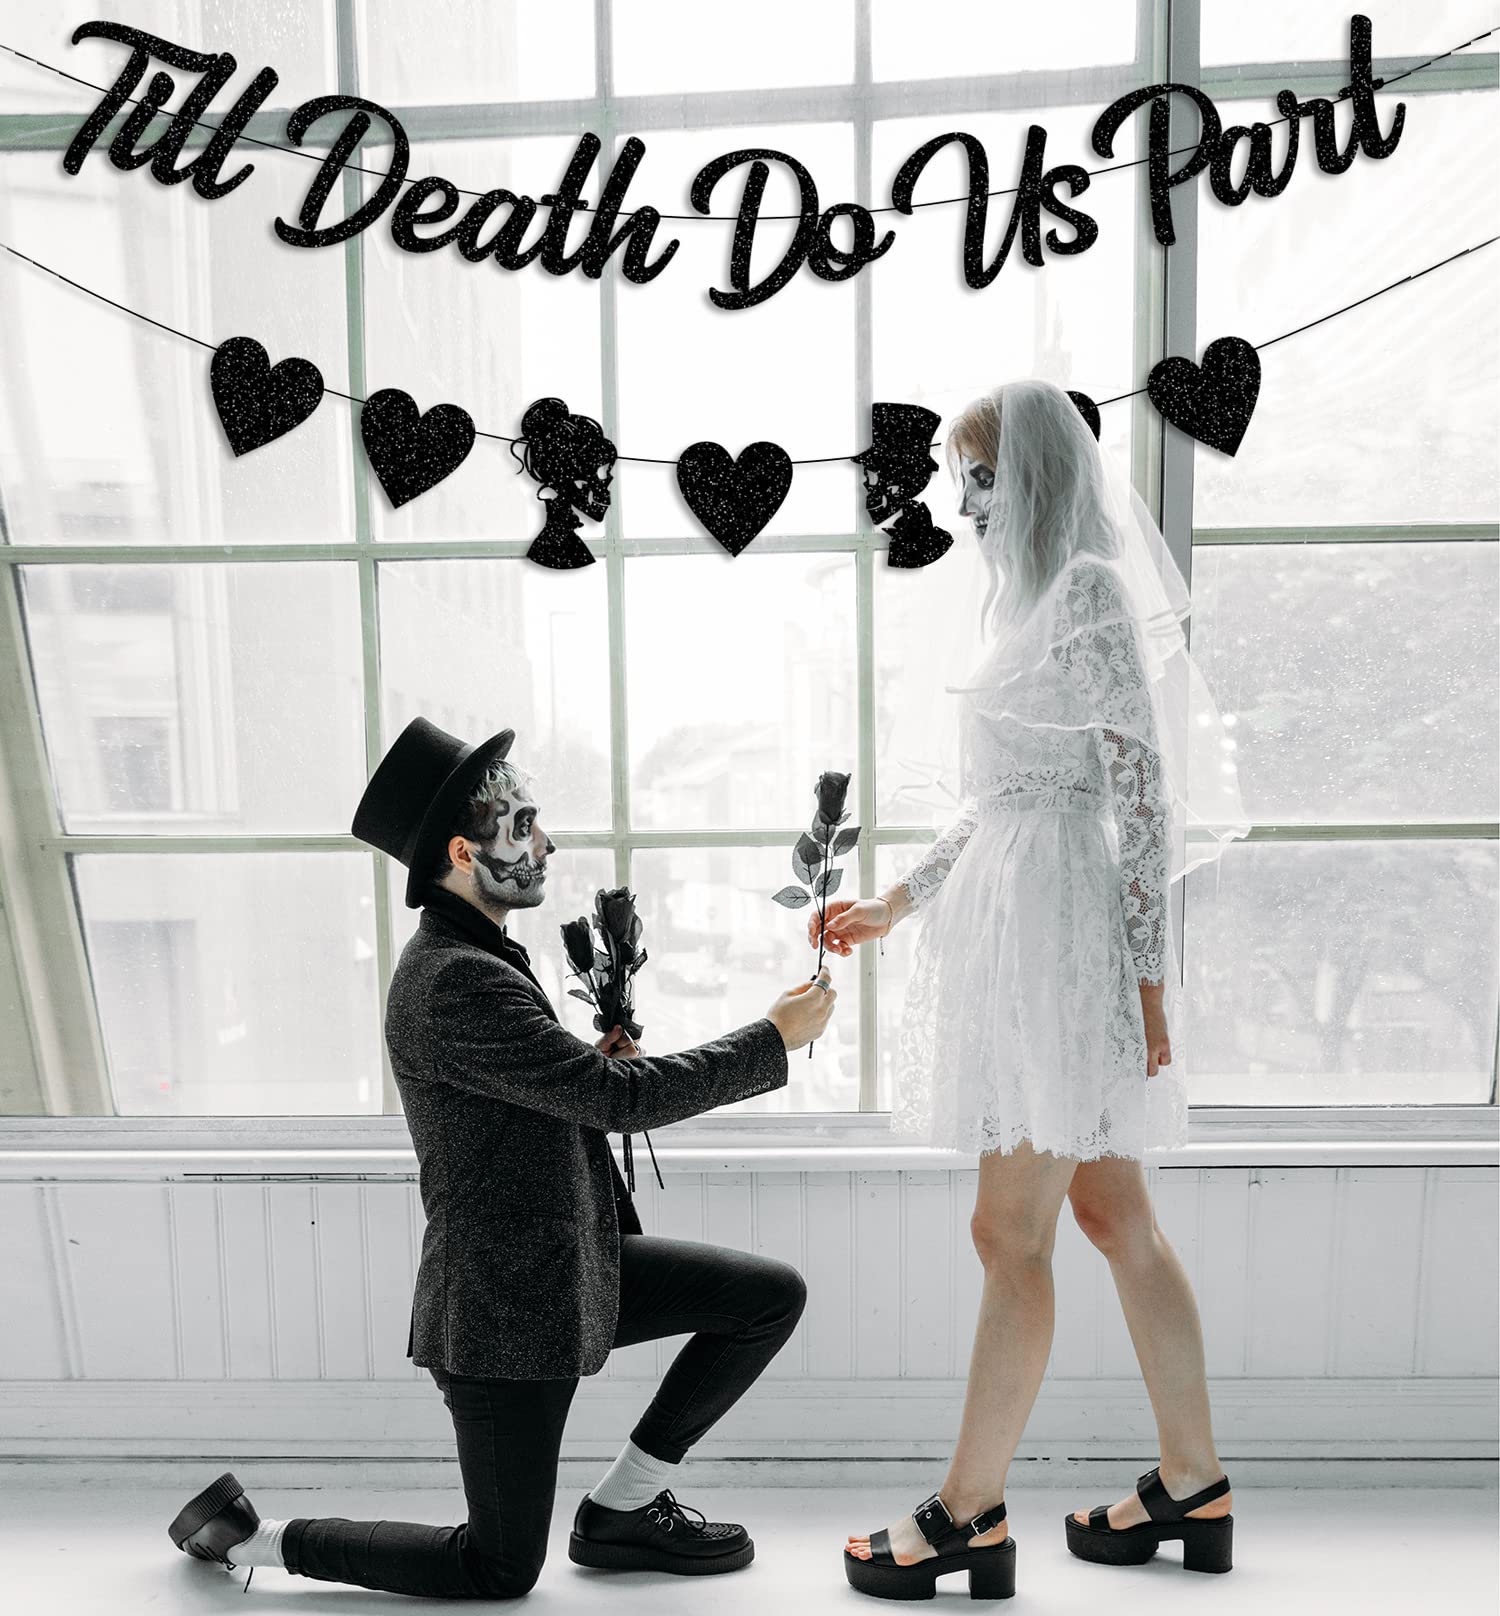 JKQ Black Glittery Till Death Do Us Part Banner with Heart Bride Groom Signs Halloween Bridal Shower Garland Banner Halloween Themed Wedding Bachelorette Engagement Party Fireplace Mantle Decorations